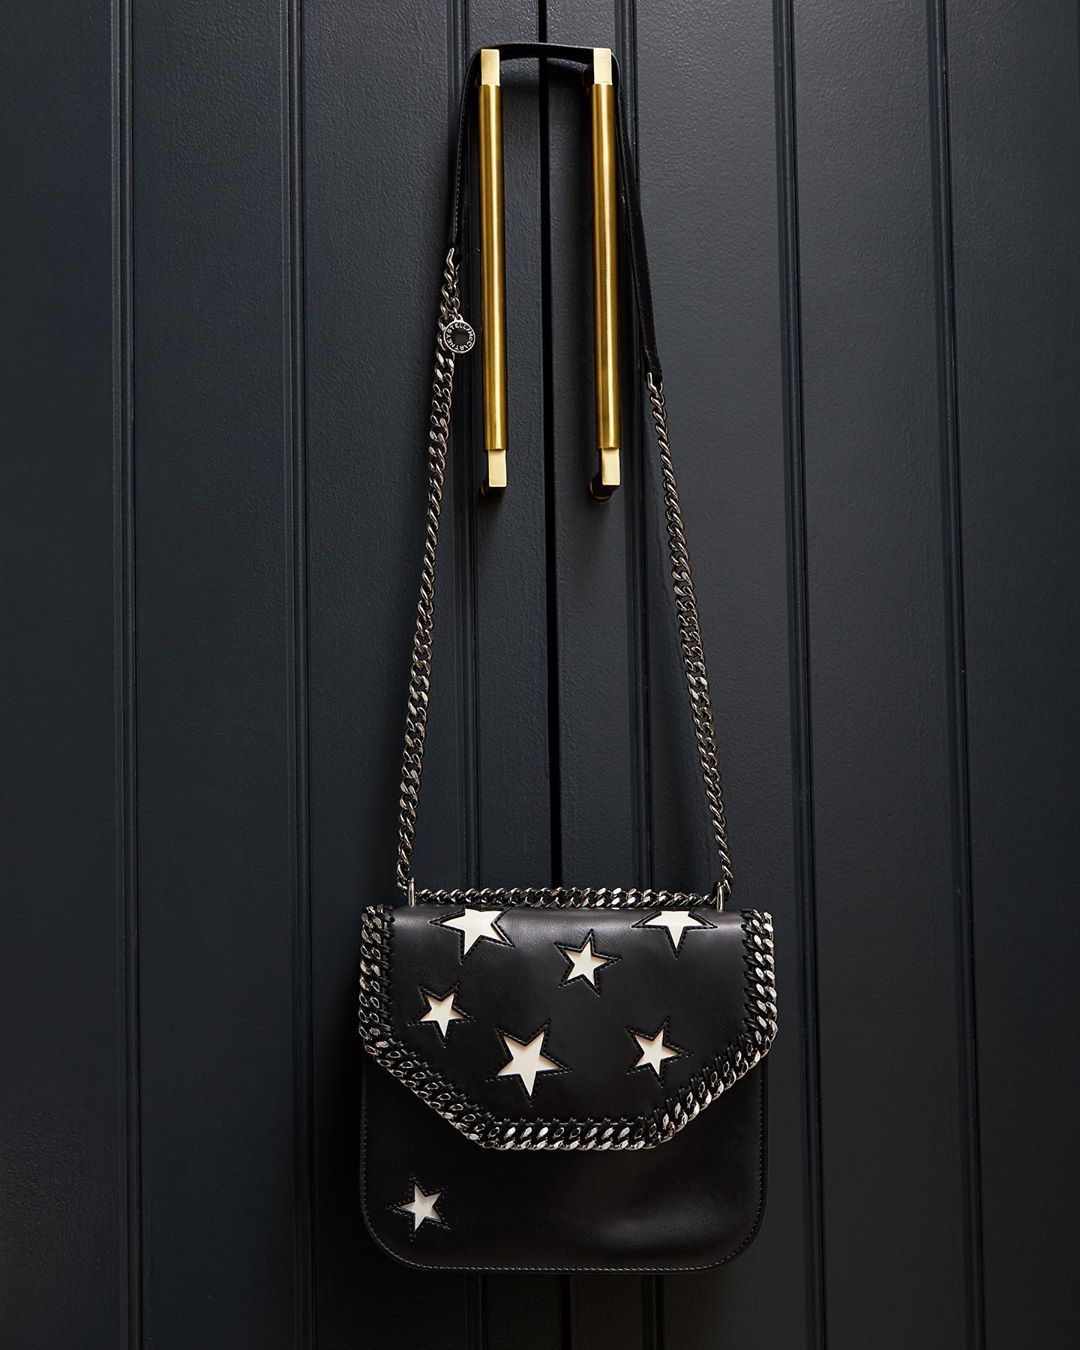 THE OUTNET - We've got stars in our eyes, and on our bags courtesy of @stellamccartney

Shop all your favorite Instagram looks, just visit #linkinbio